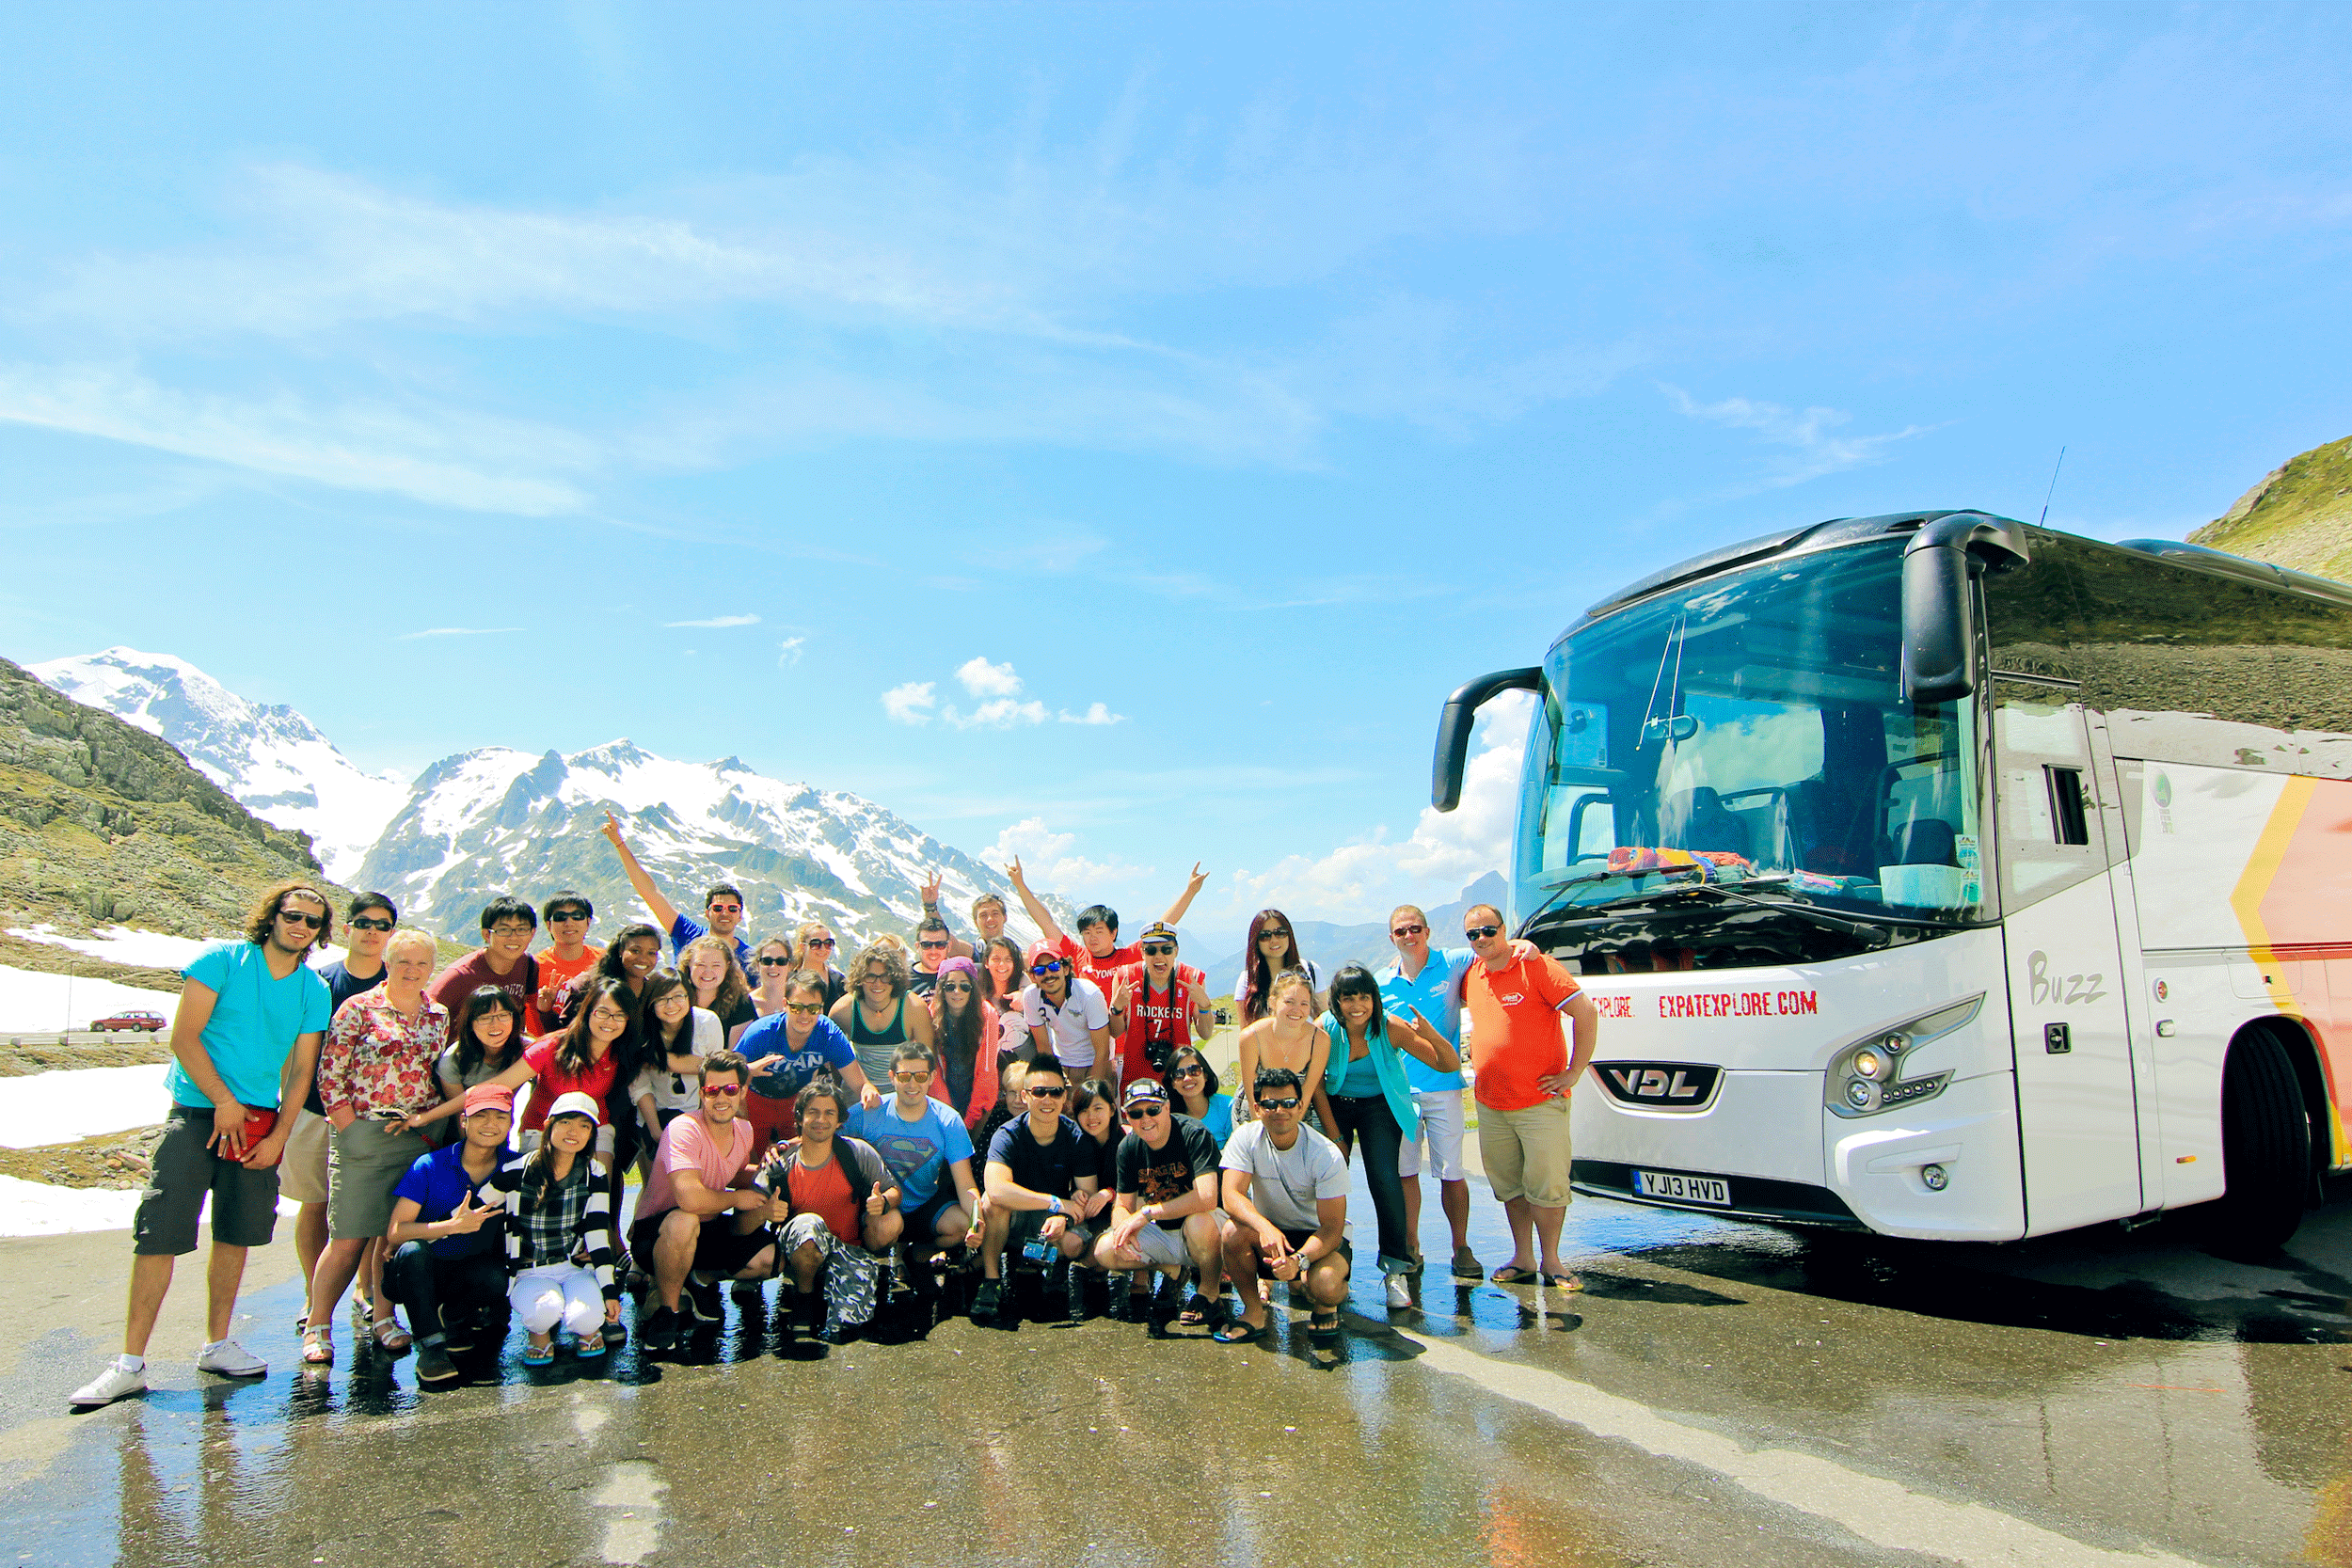 coach tours from uk to europe